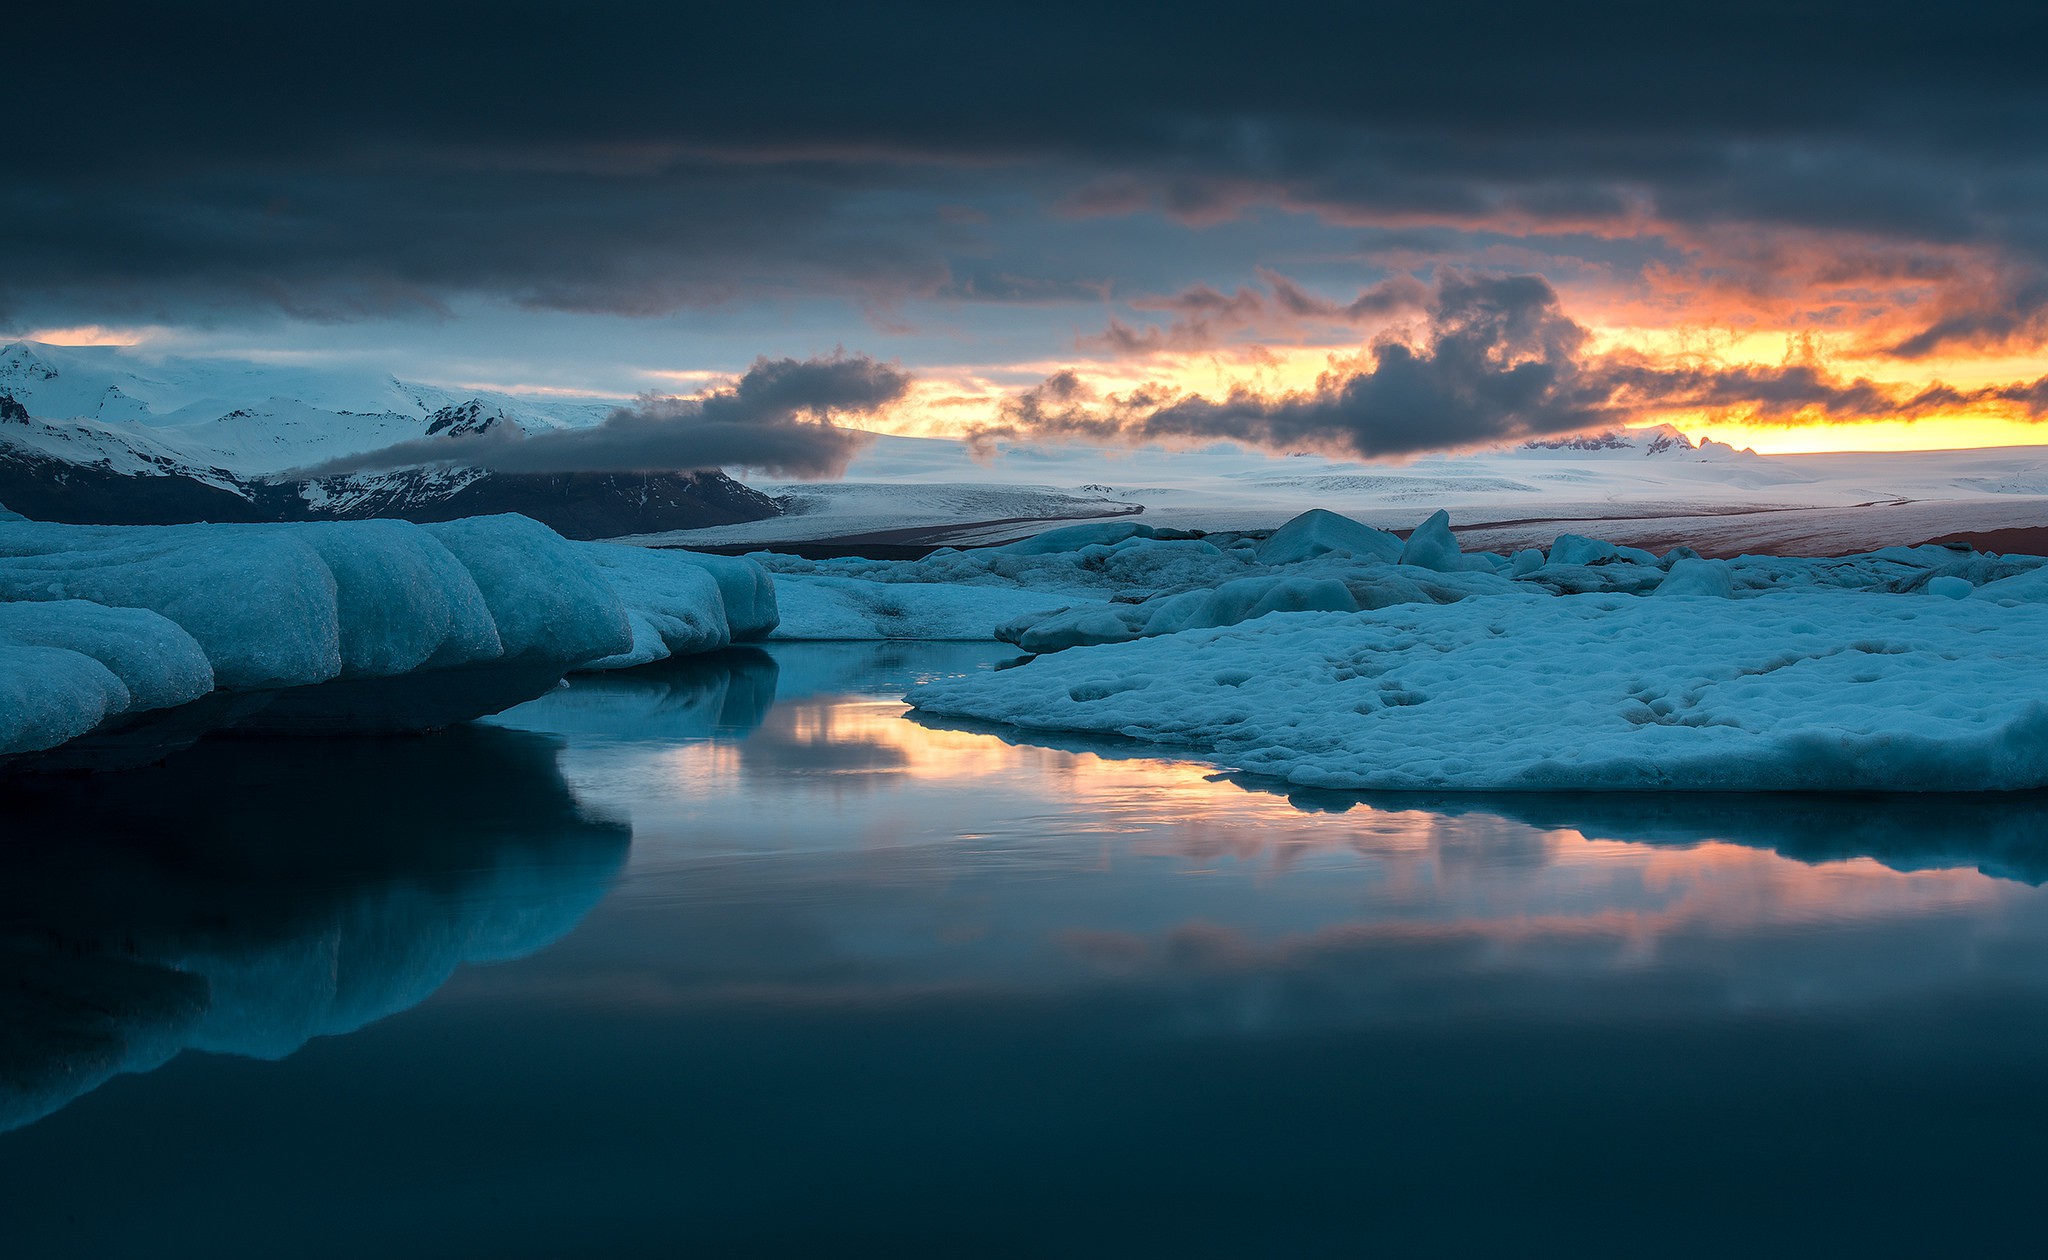 General 2048x1260 nature landscape winter snow ice Iceland sunset lake mountains reflection calm waters water blue low light